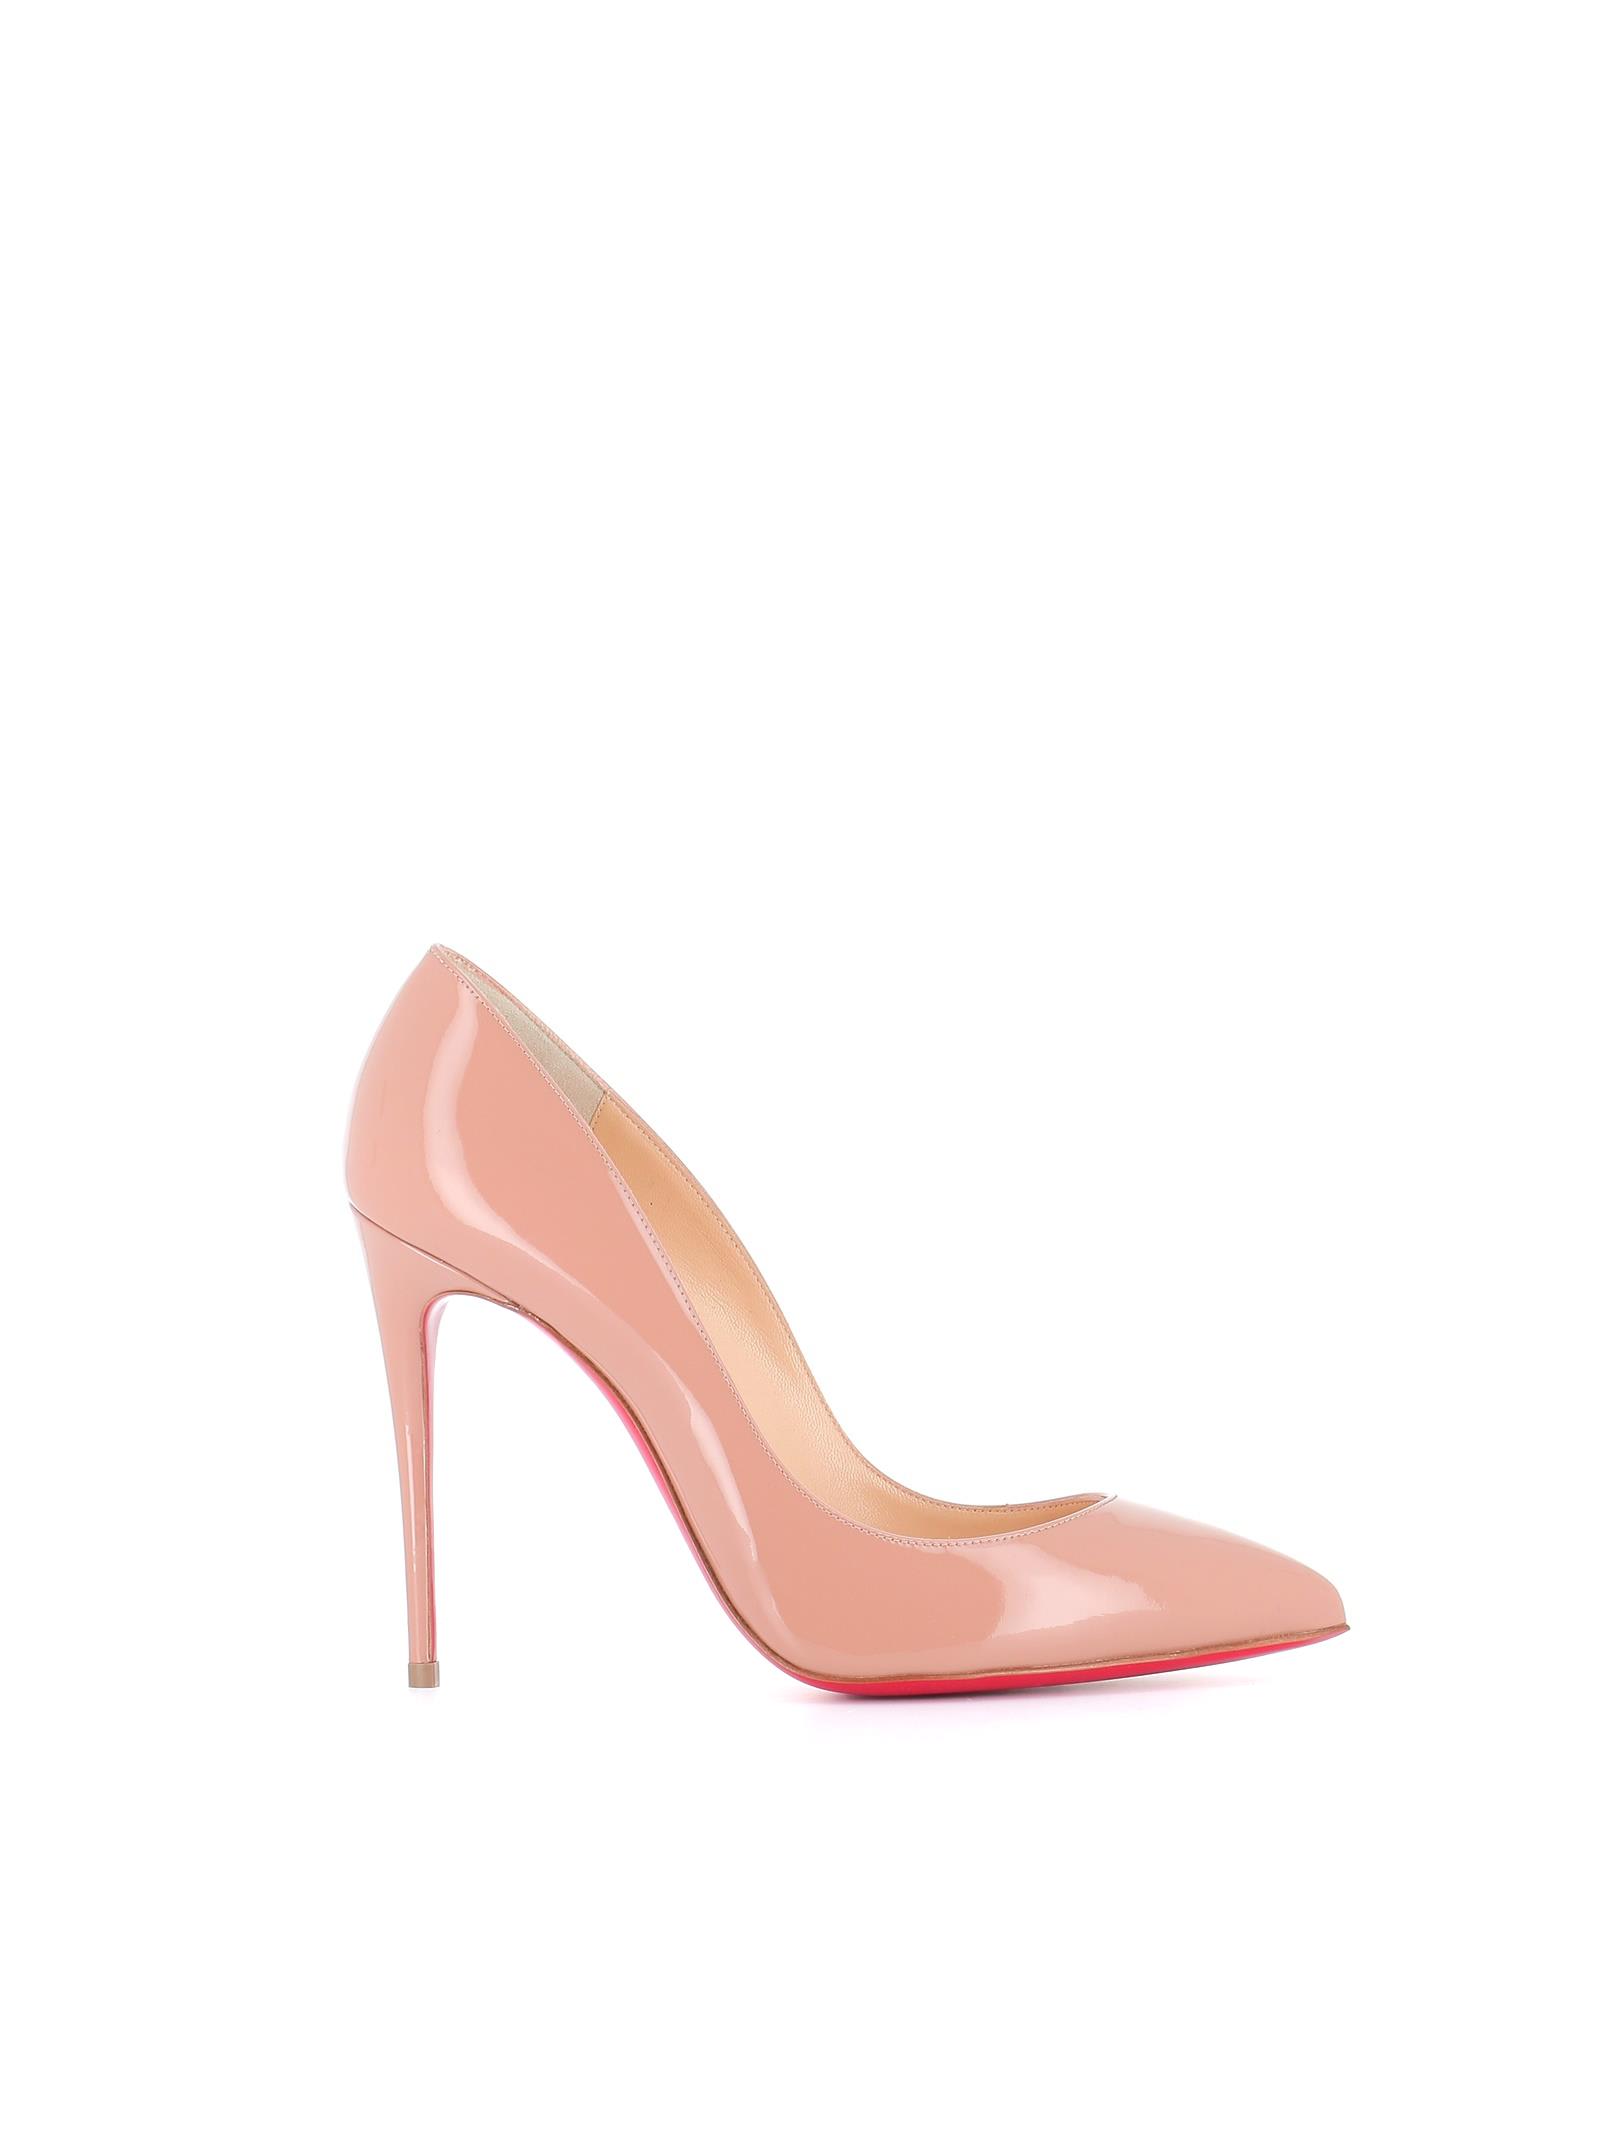 Buy Christian Louboutin D?ollet?Pigalle Follies online, shop Christian Louboutin shoes with free shipping